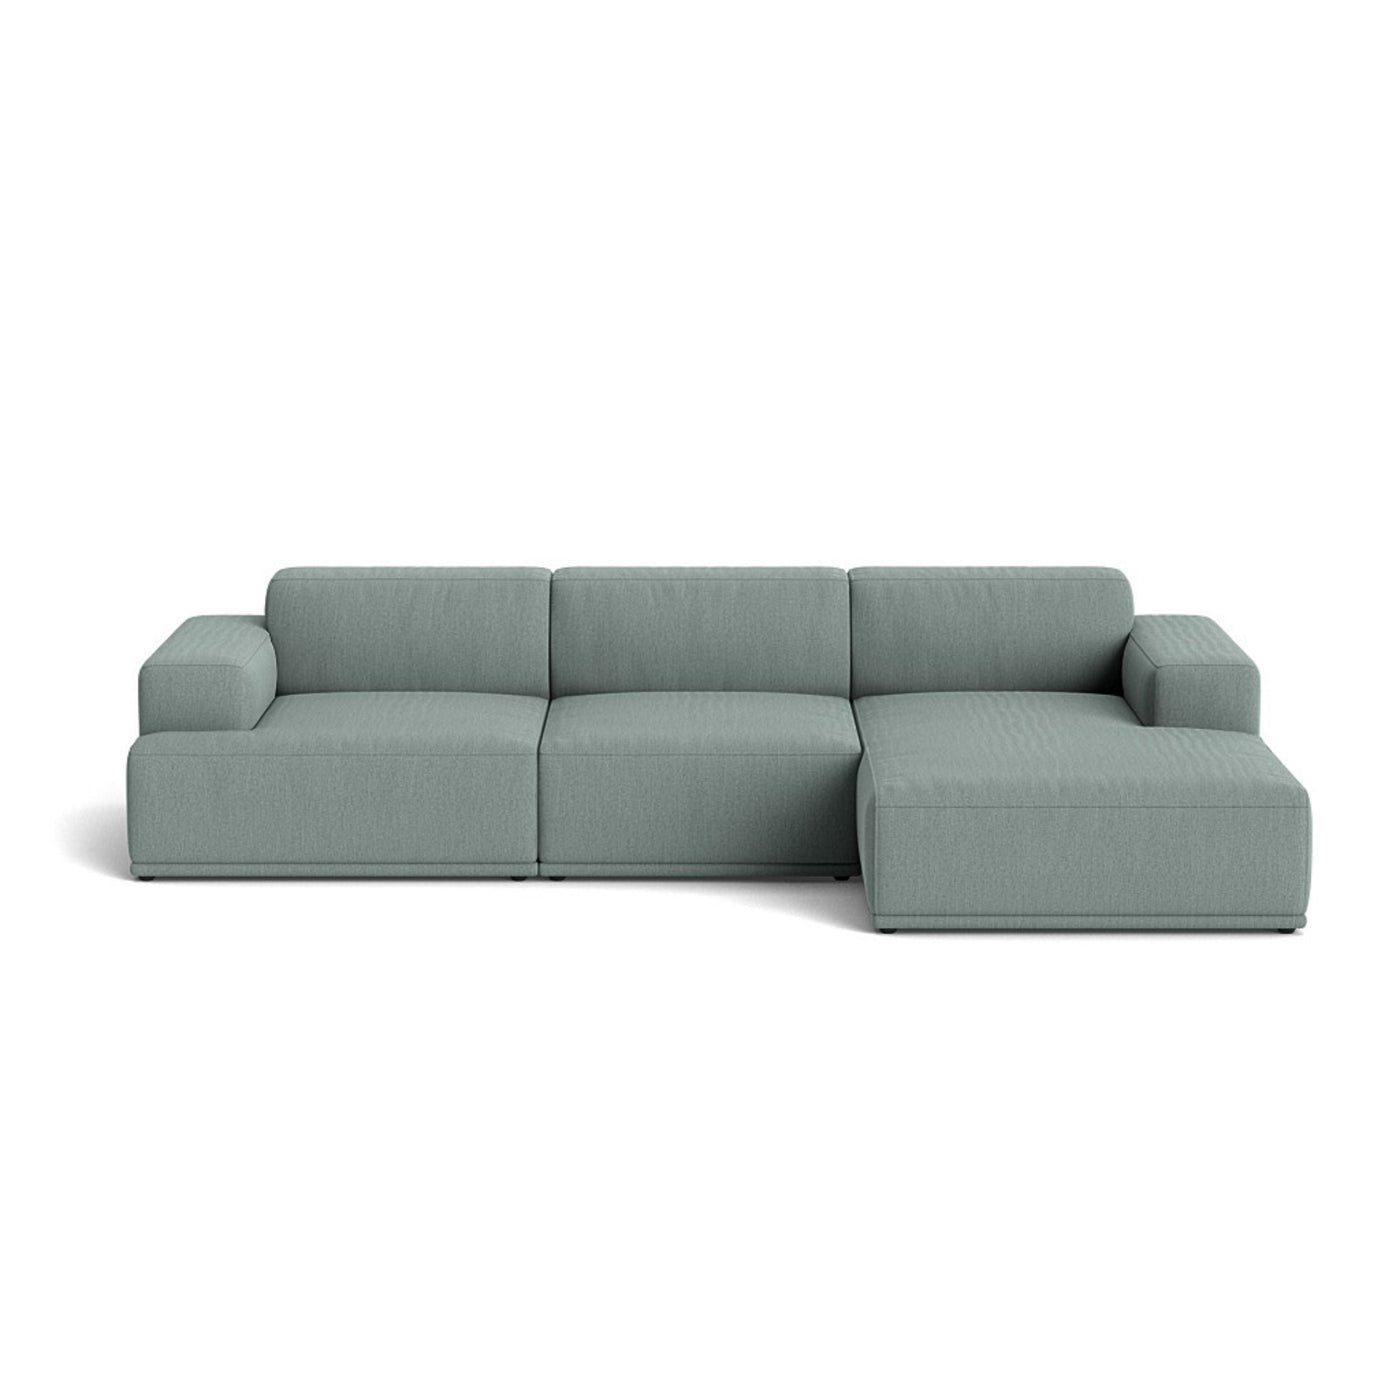 Muuto Connect Soft Modular 3 Seater Sofa, configuration 3. Made-to-order from someday designs. #colour_re-wool-828